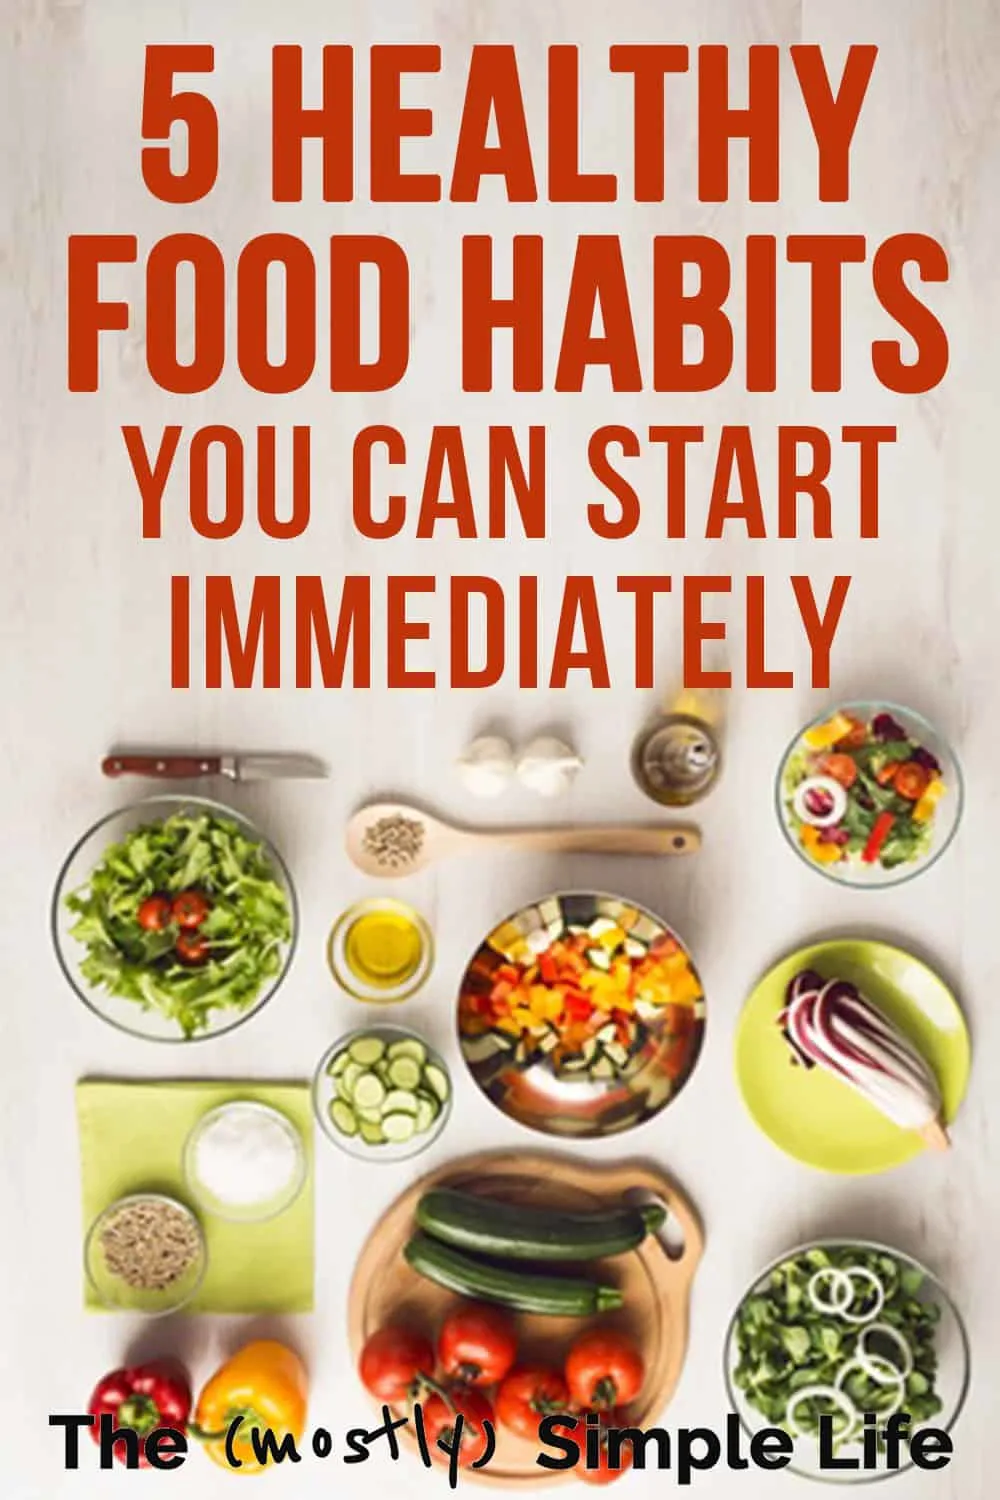 5 Healthy Food Habits You Can Start Adopting Immediately